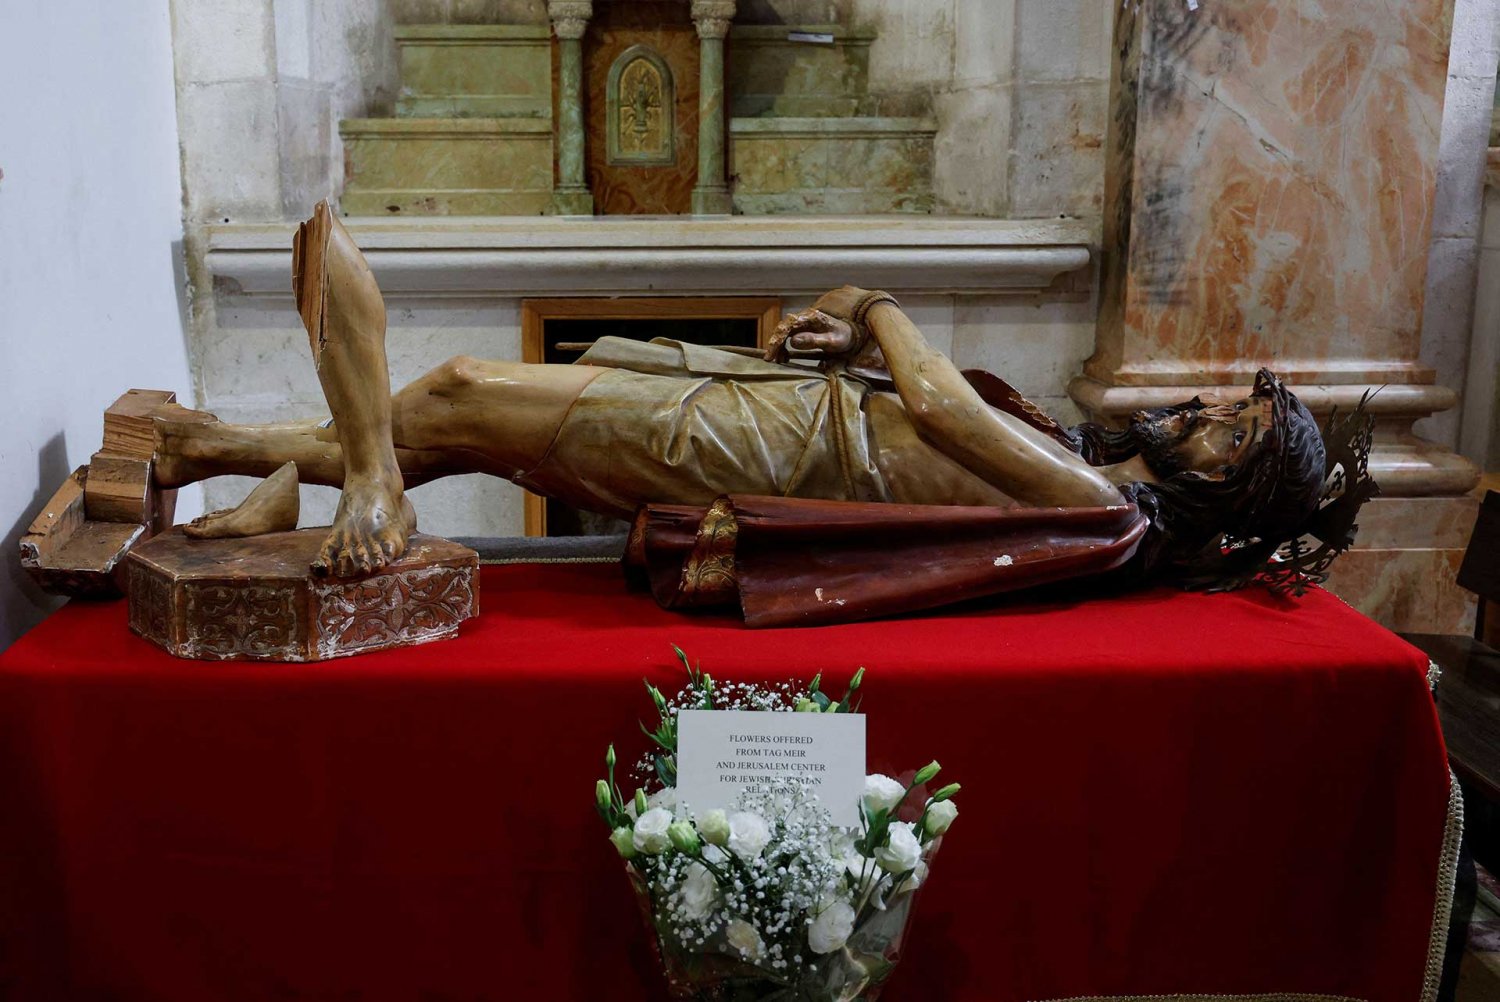 A statue of Jesus Christ, defaced and toppled, in the Church of the Flagellation, Jerusalem, February 2, 2023